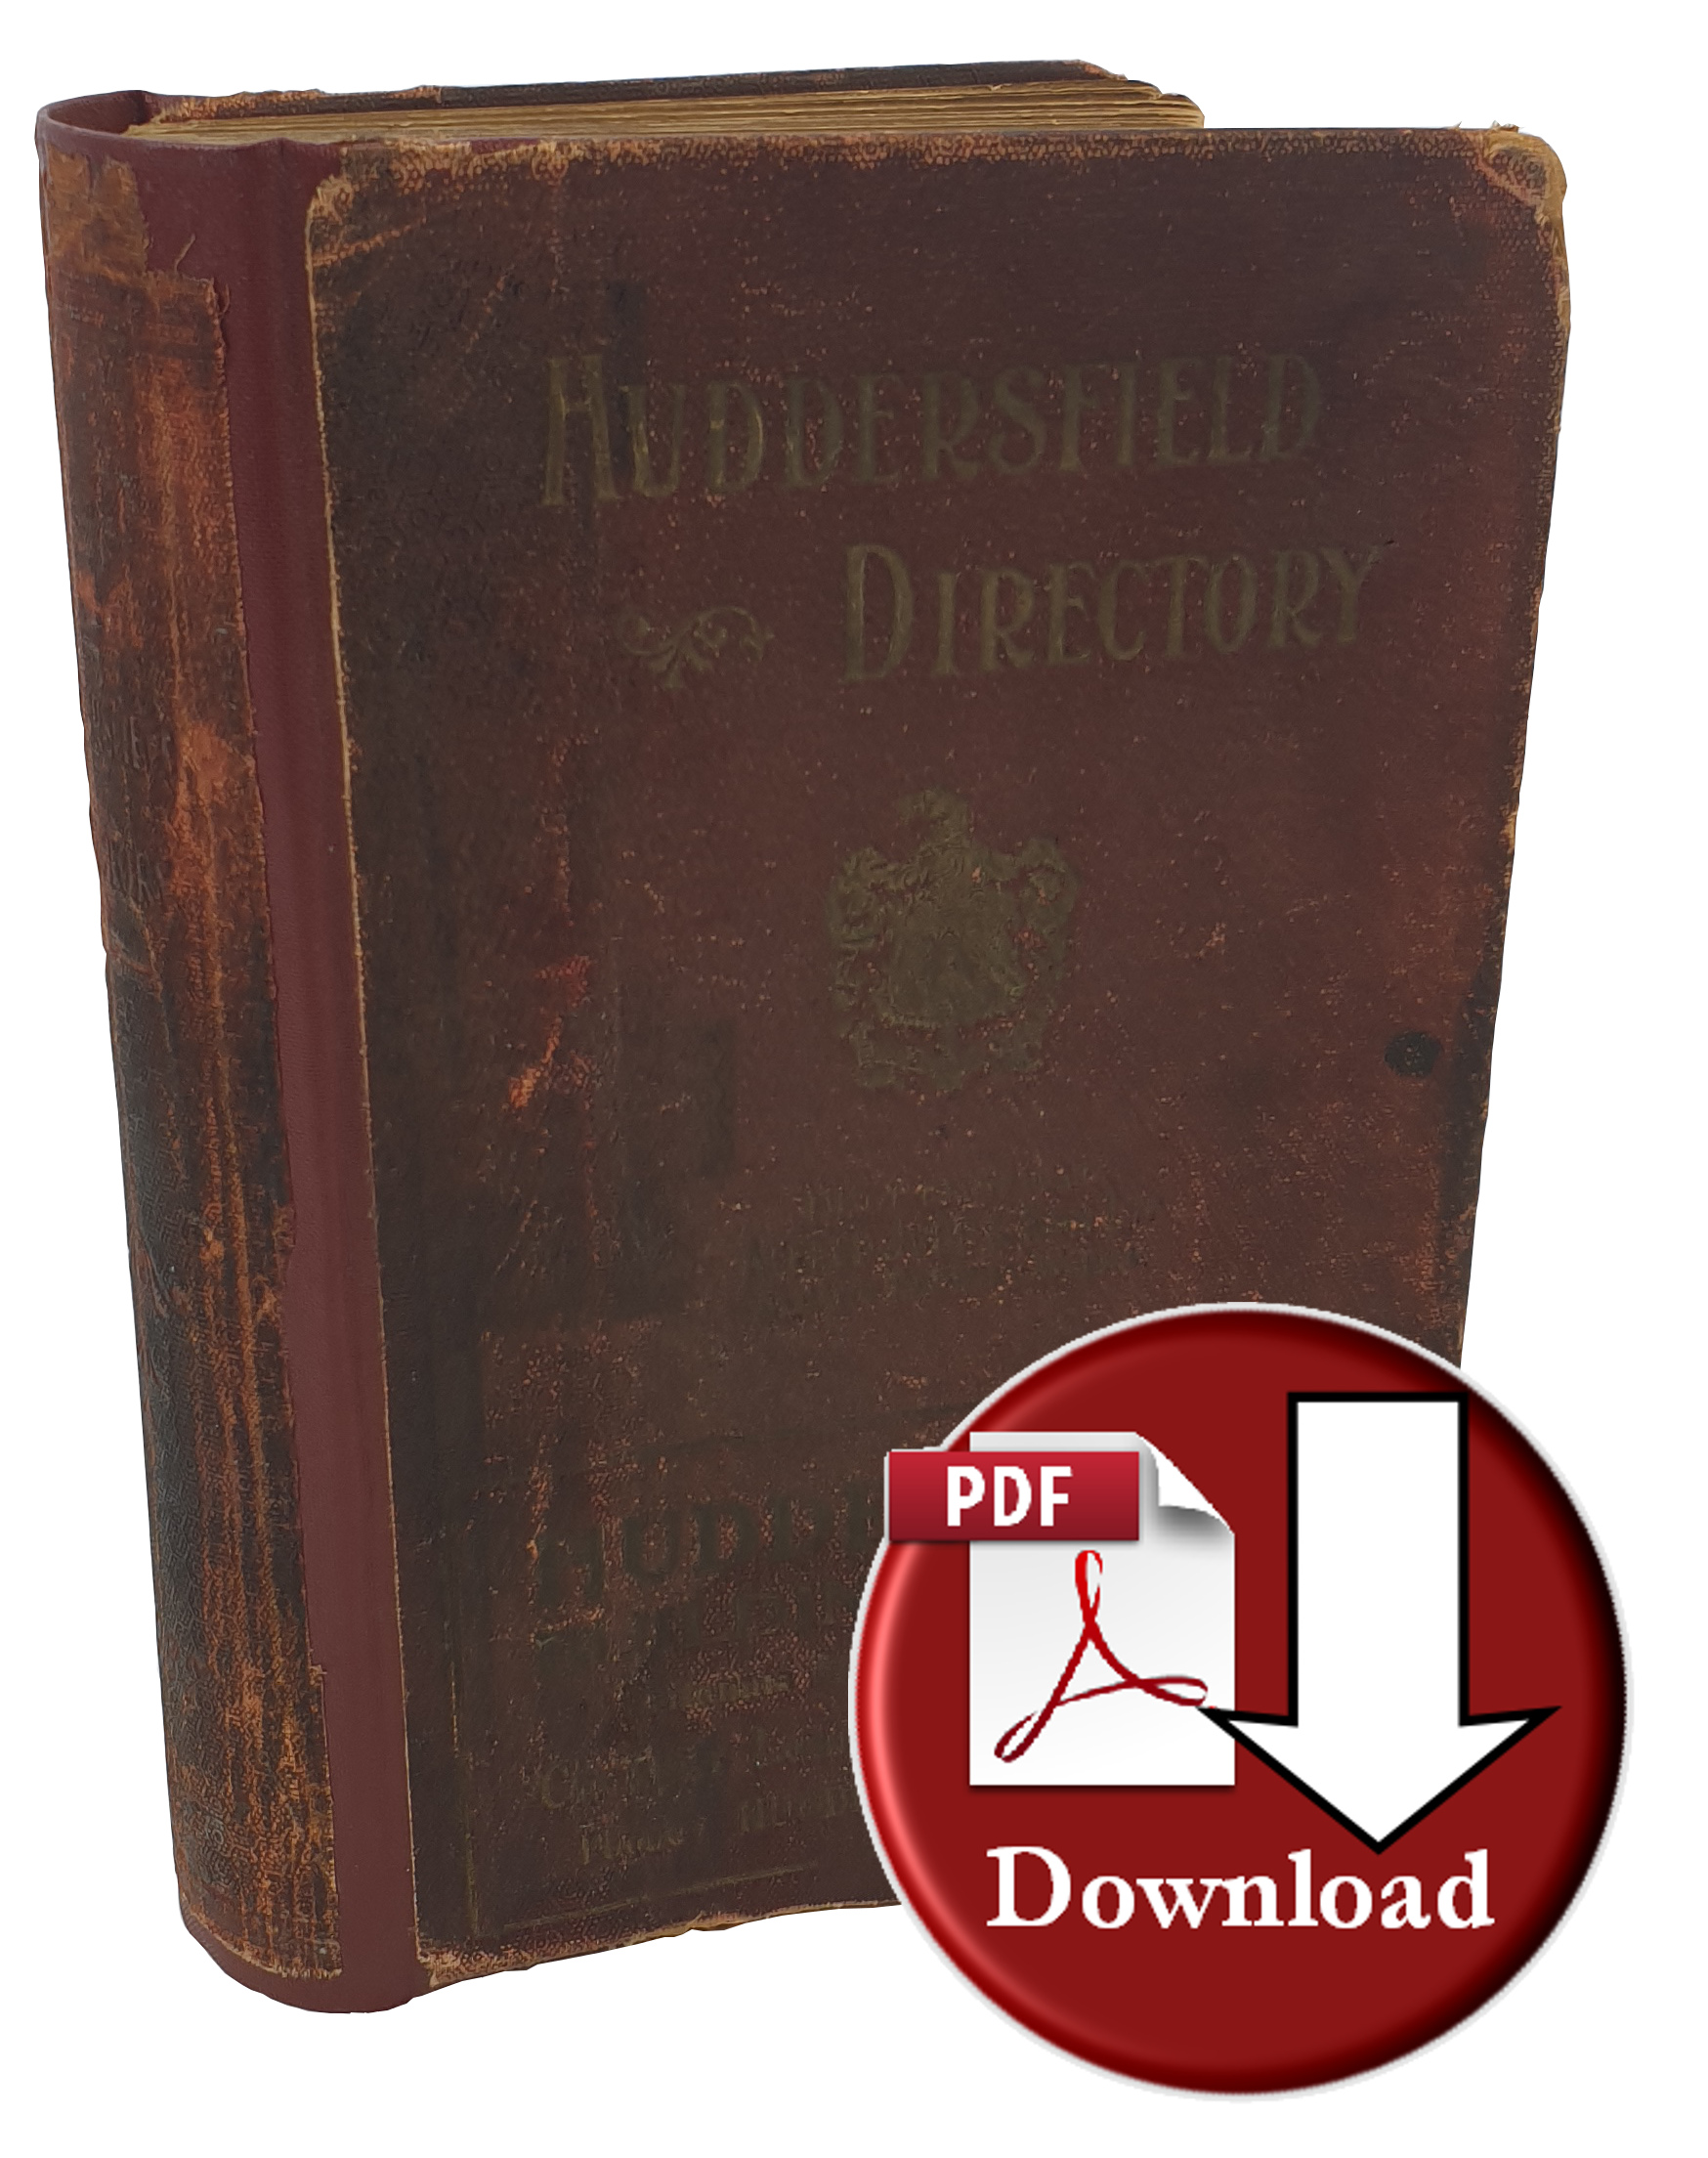 The Huddersfield County Borough Directory 1937 (Digital Download)